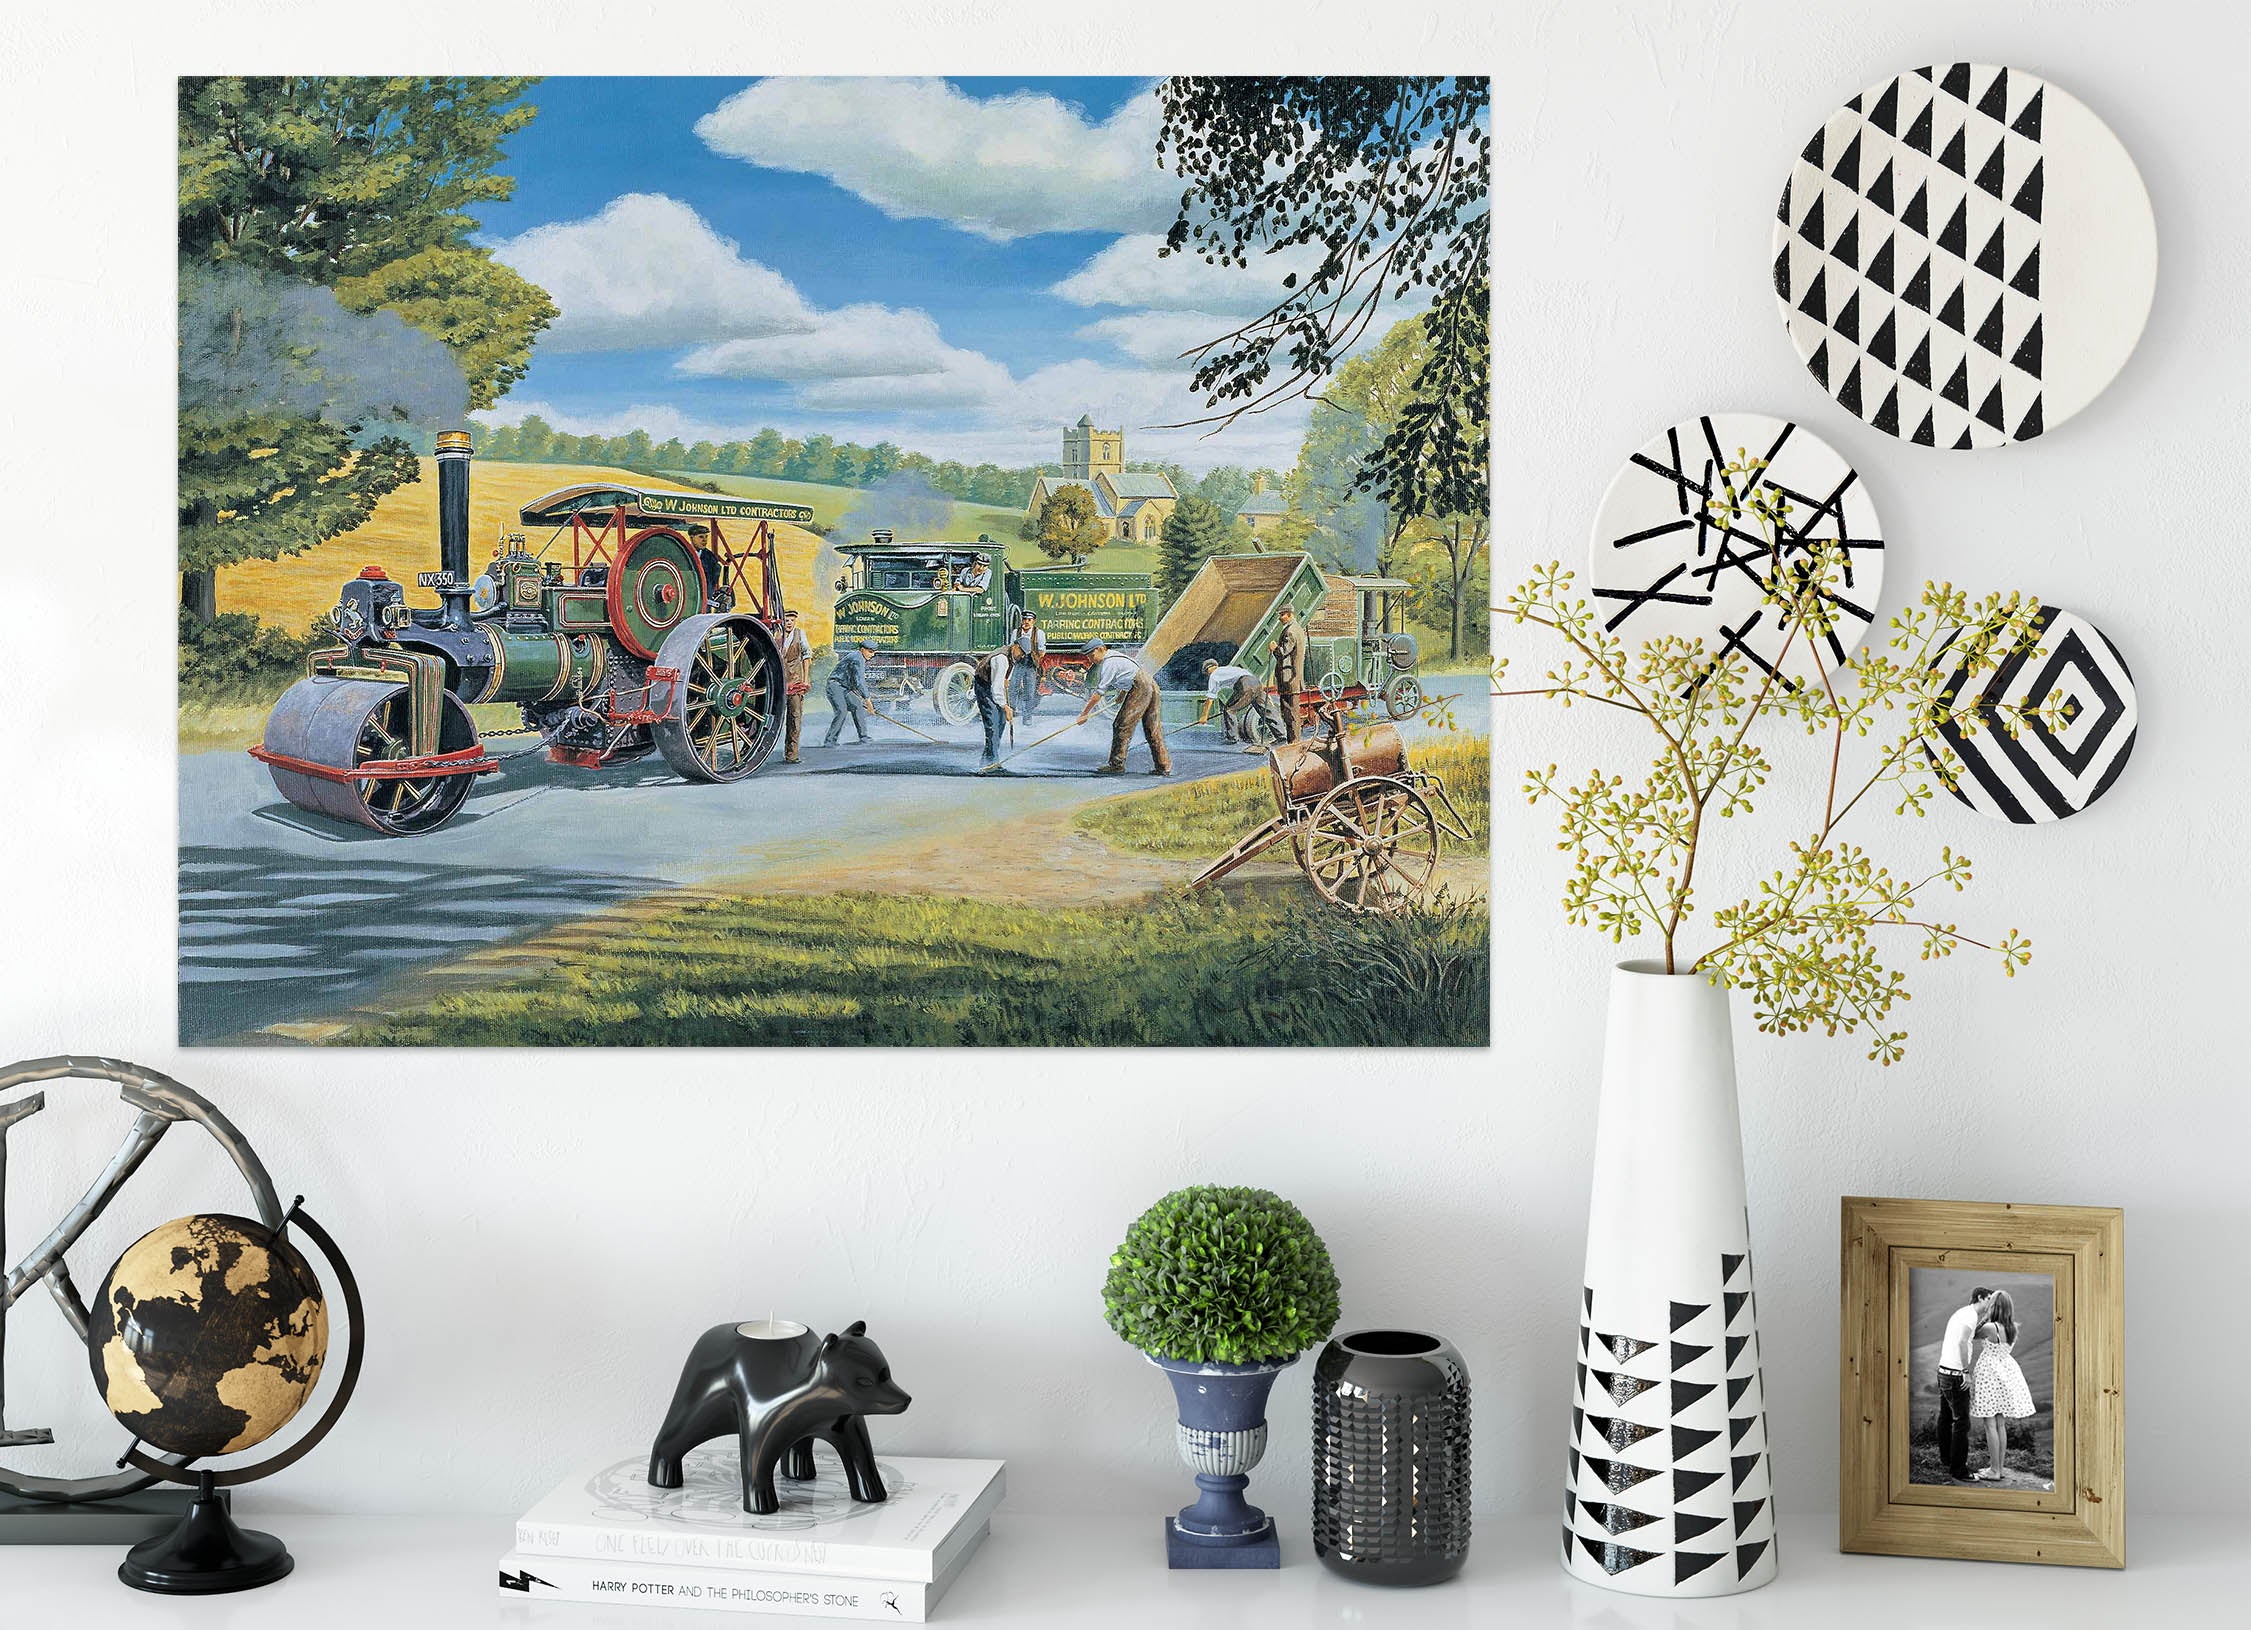 3D The Road Menders 076 Trevor Mitchell Wall Sticker